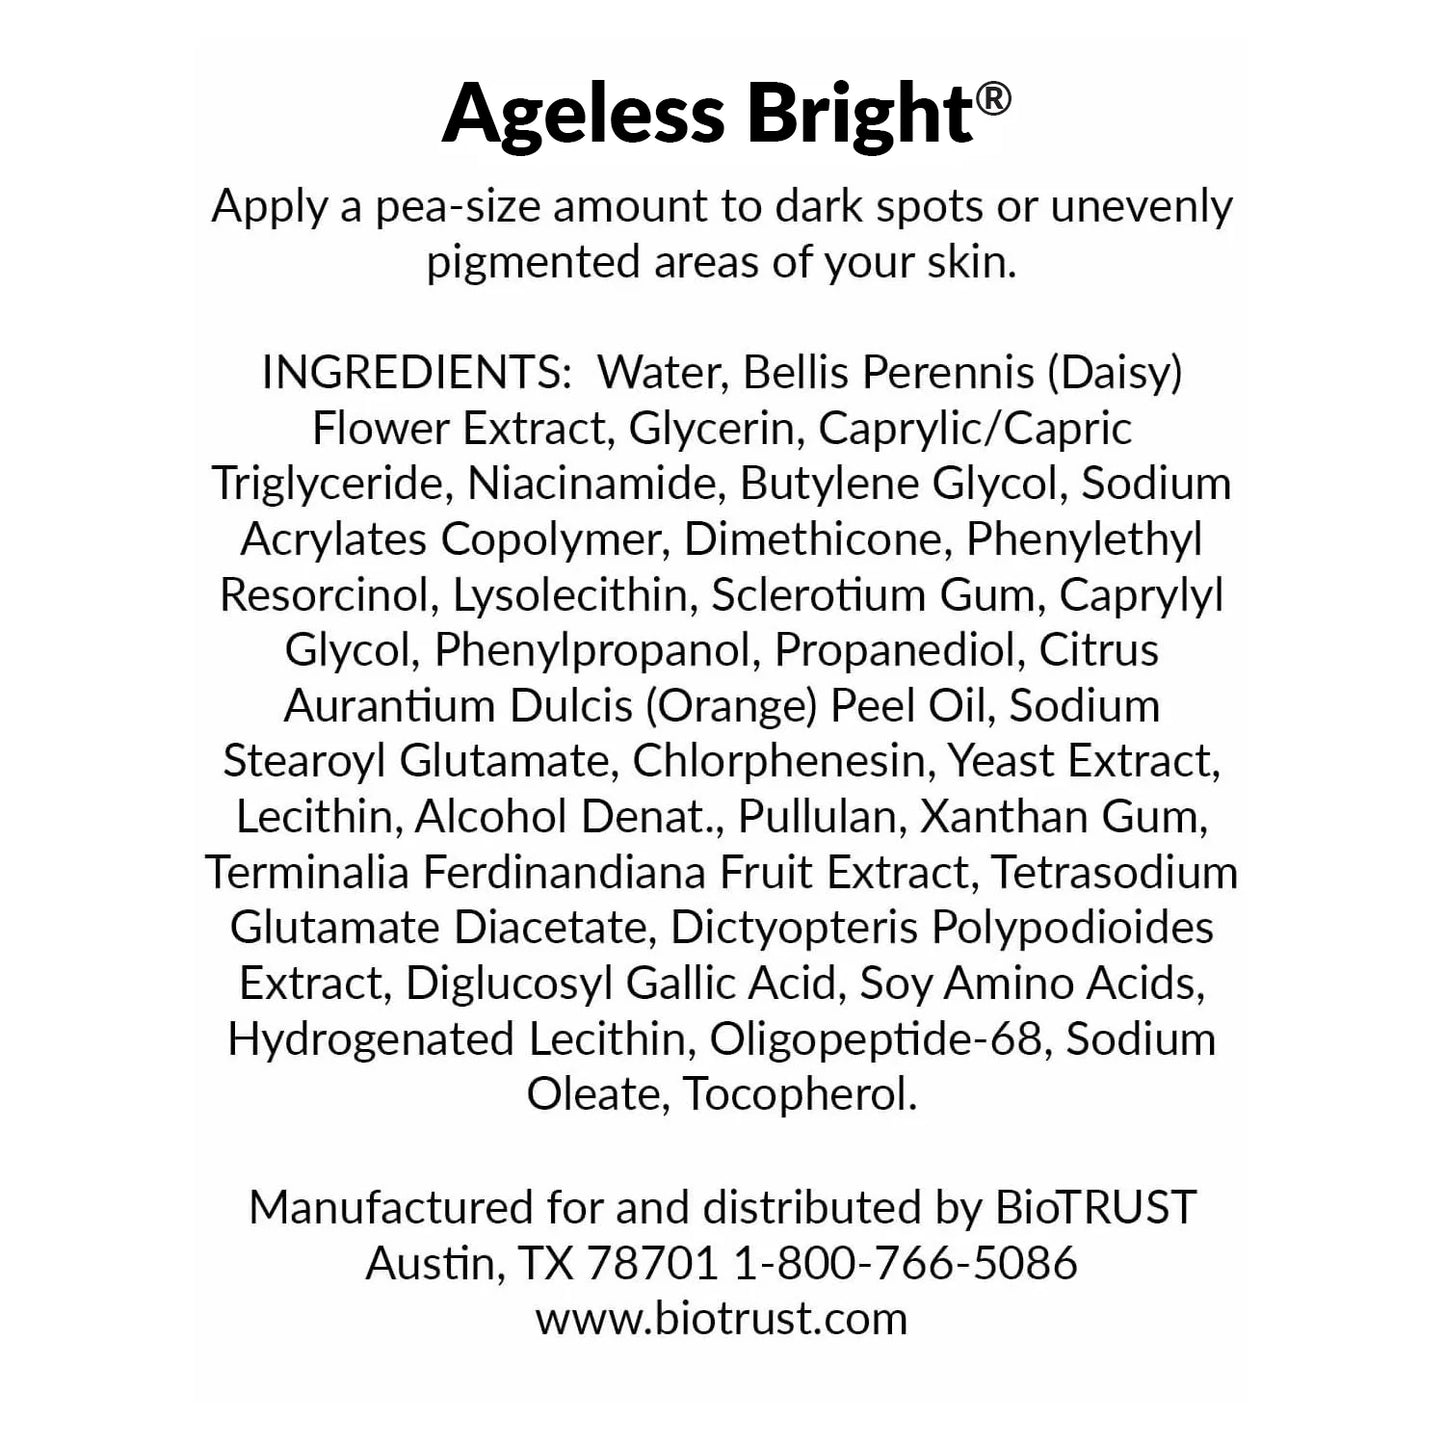 BioTrust Ageless Bright - $39 Per Bottle Up to 50% OFF